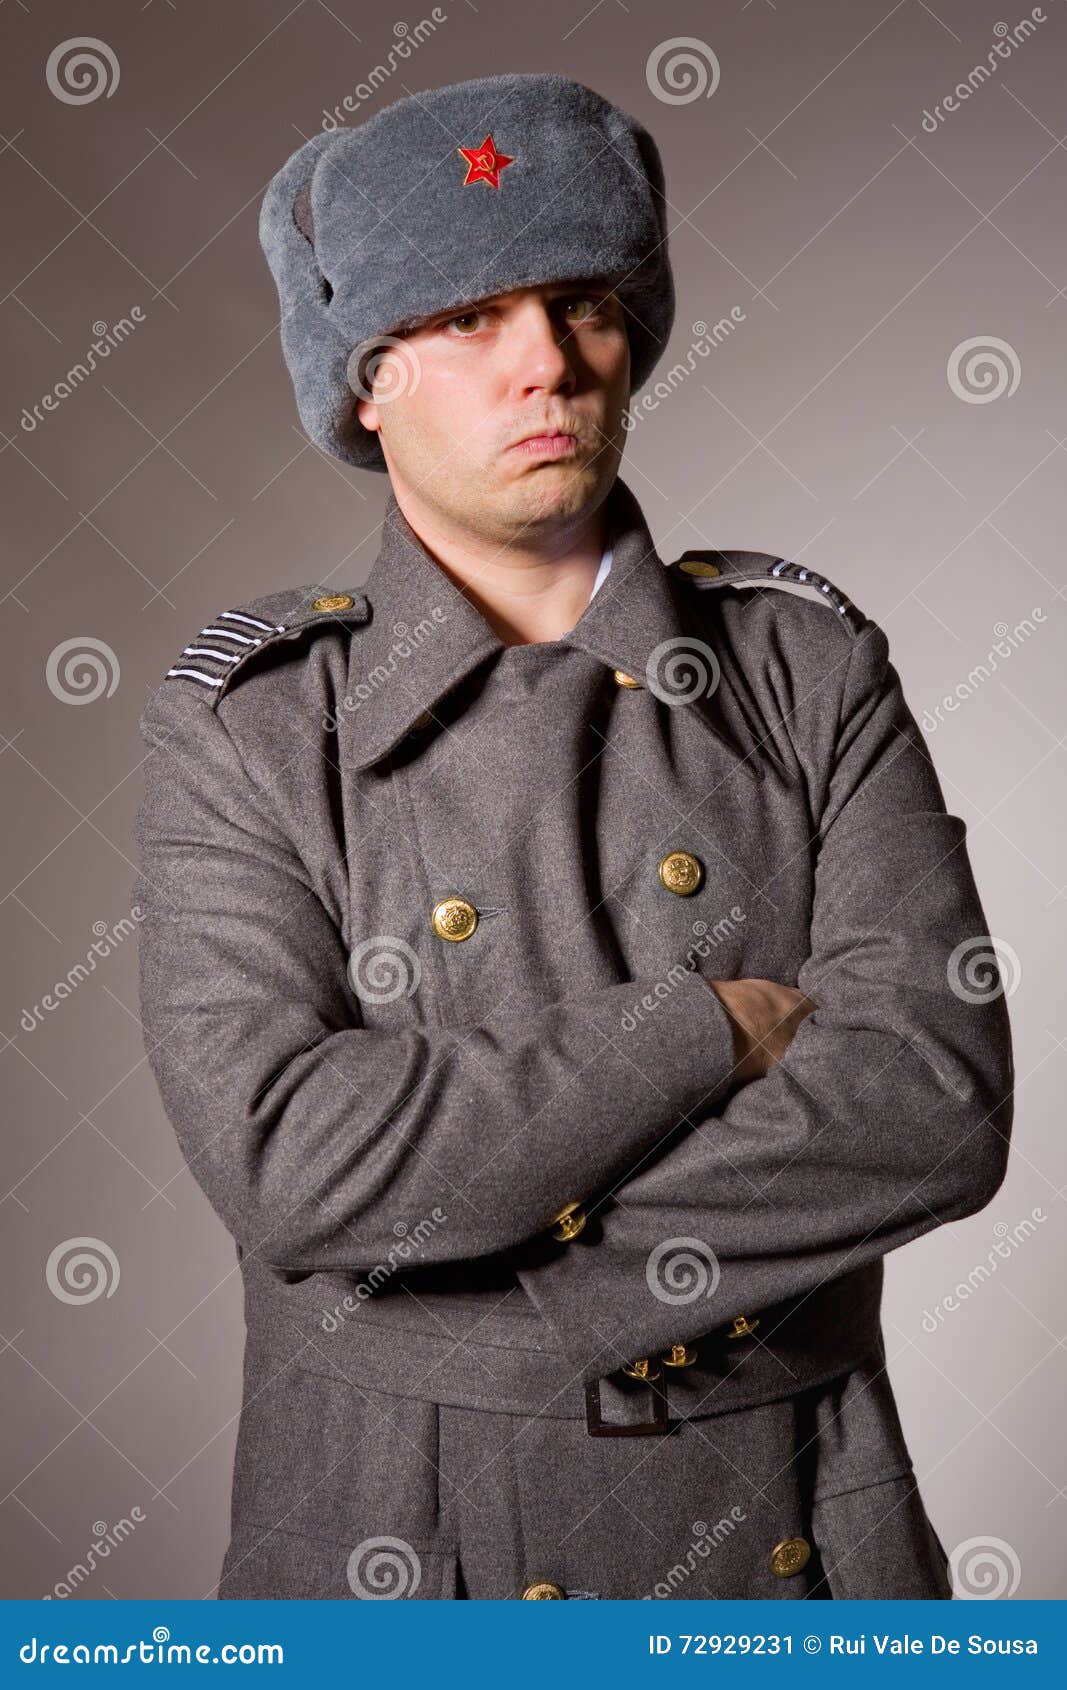 Russian military stock image. Image of soldier, officer - 72929231